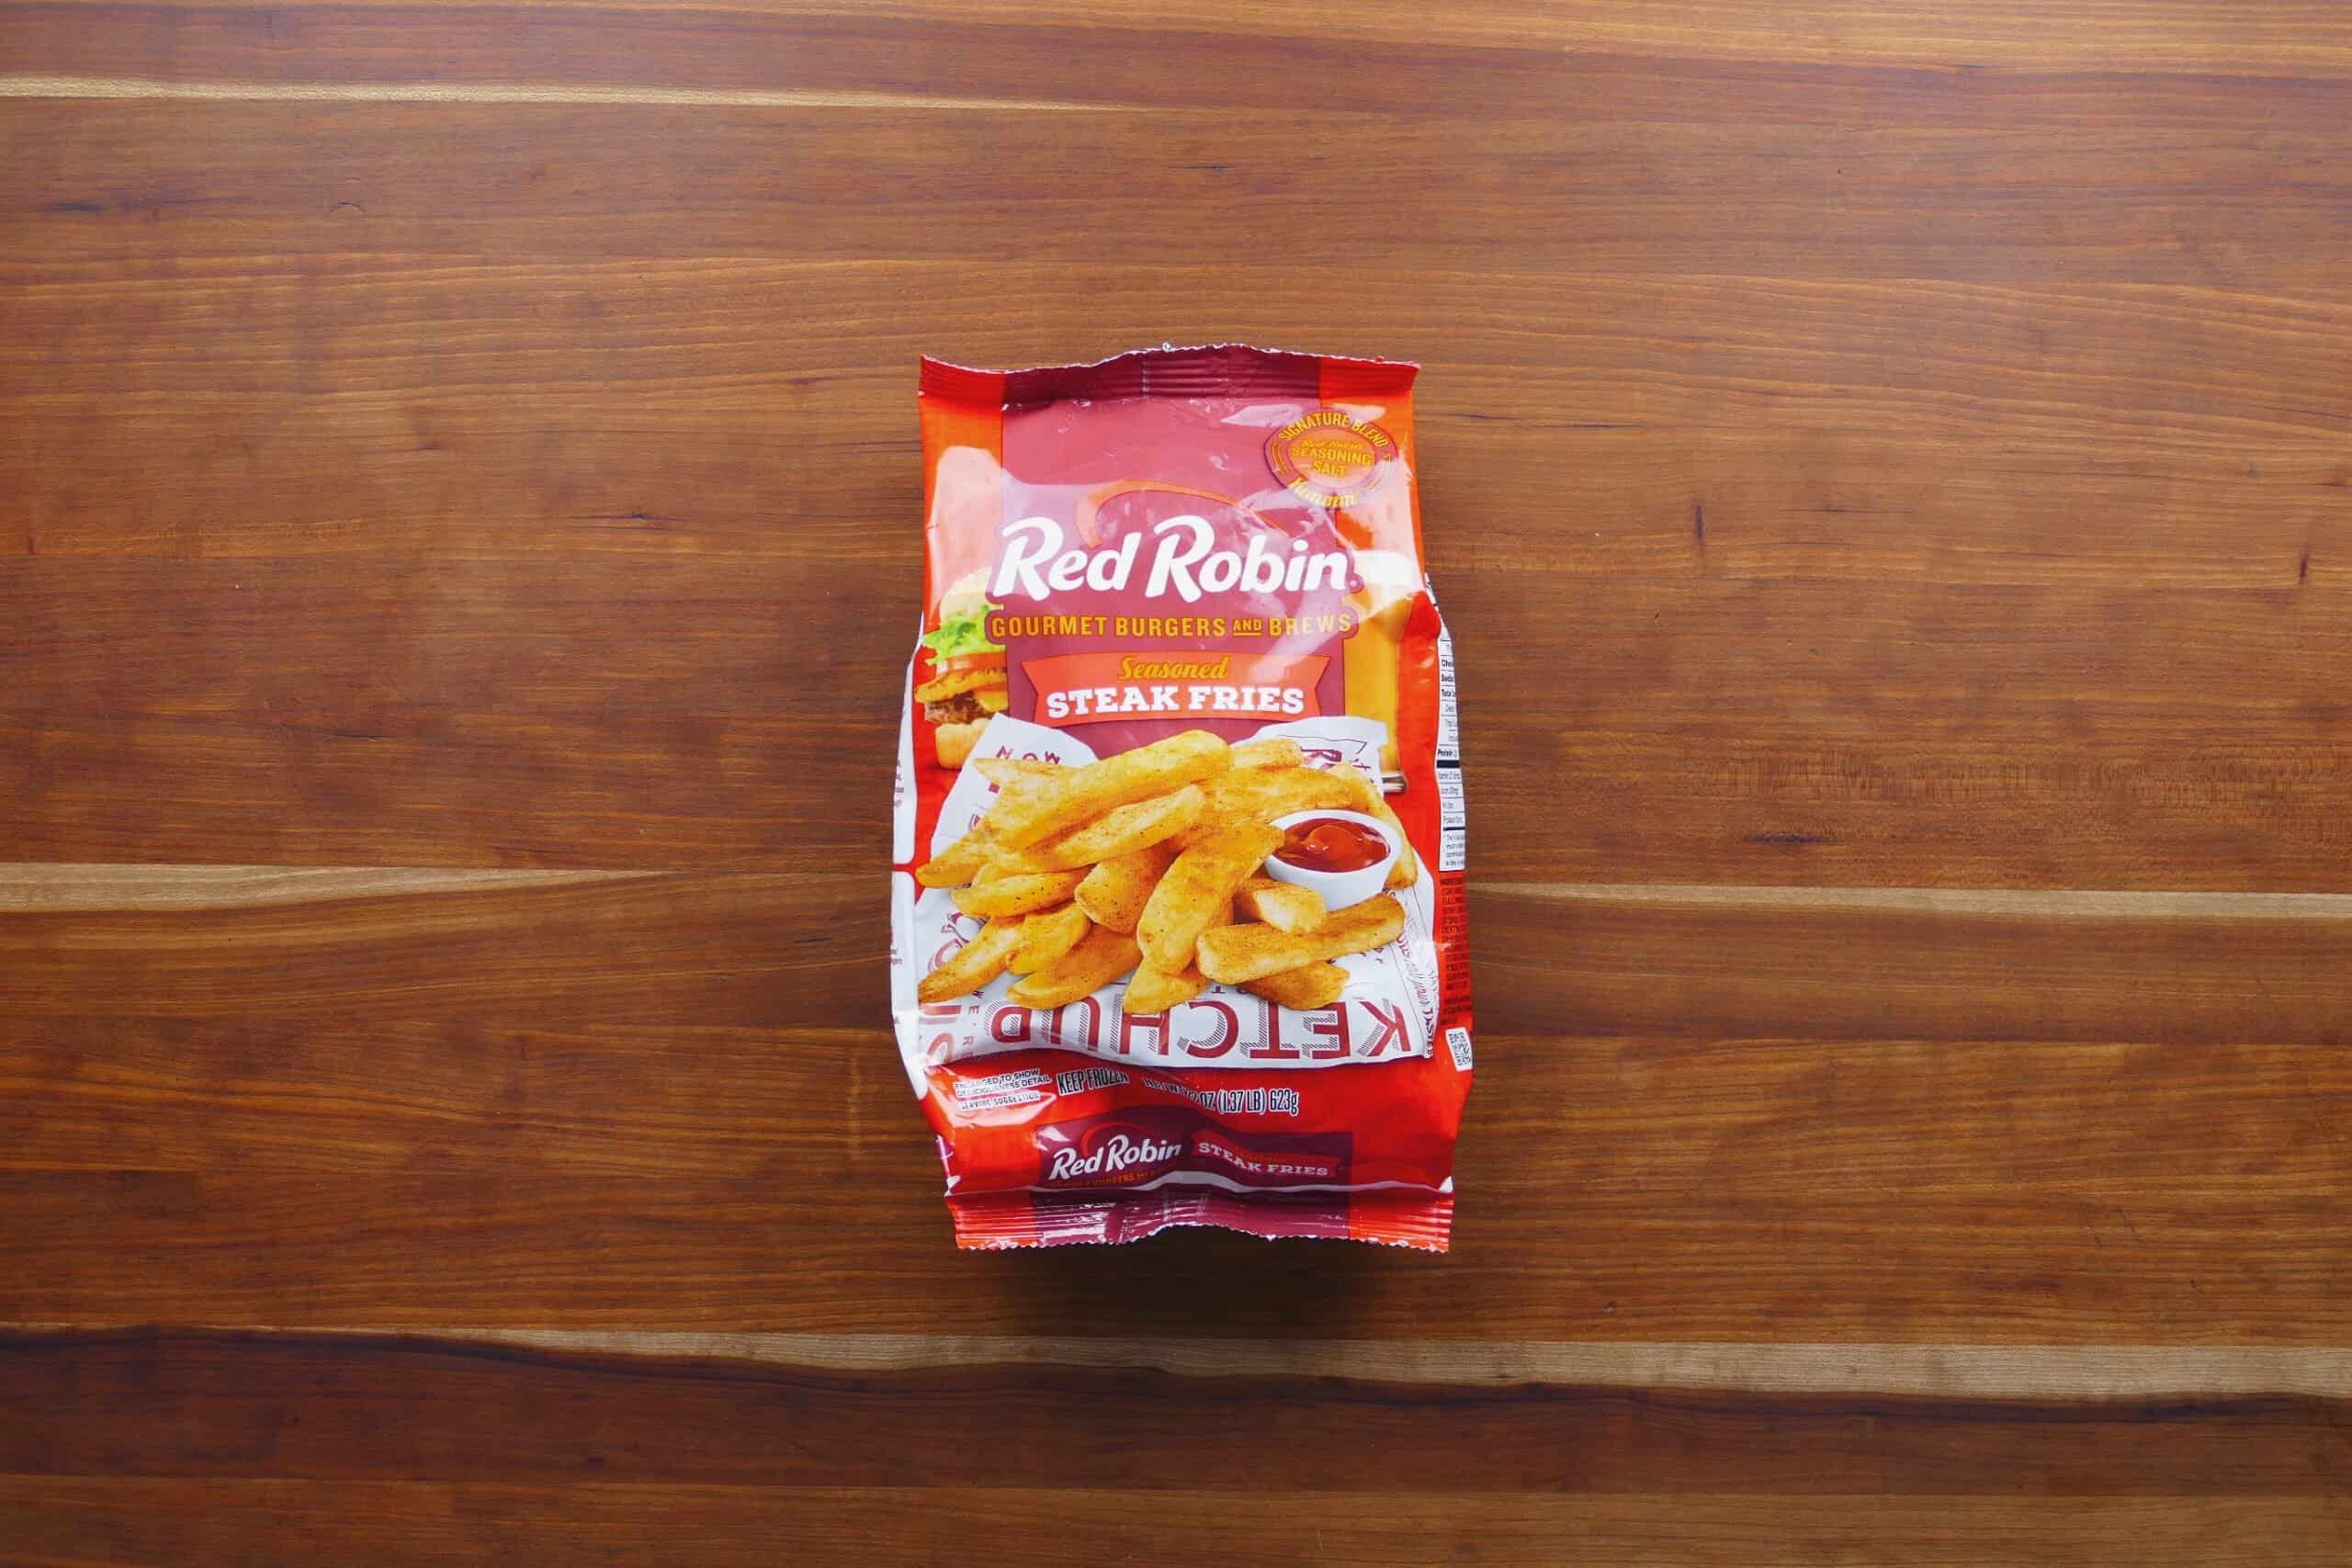 Bag of Red Robin steak fries on wooden surface